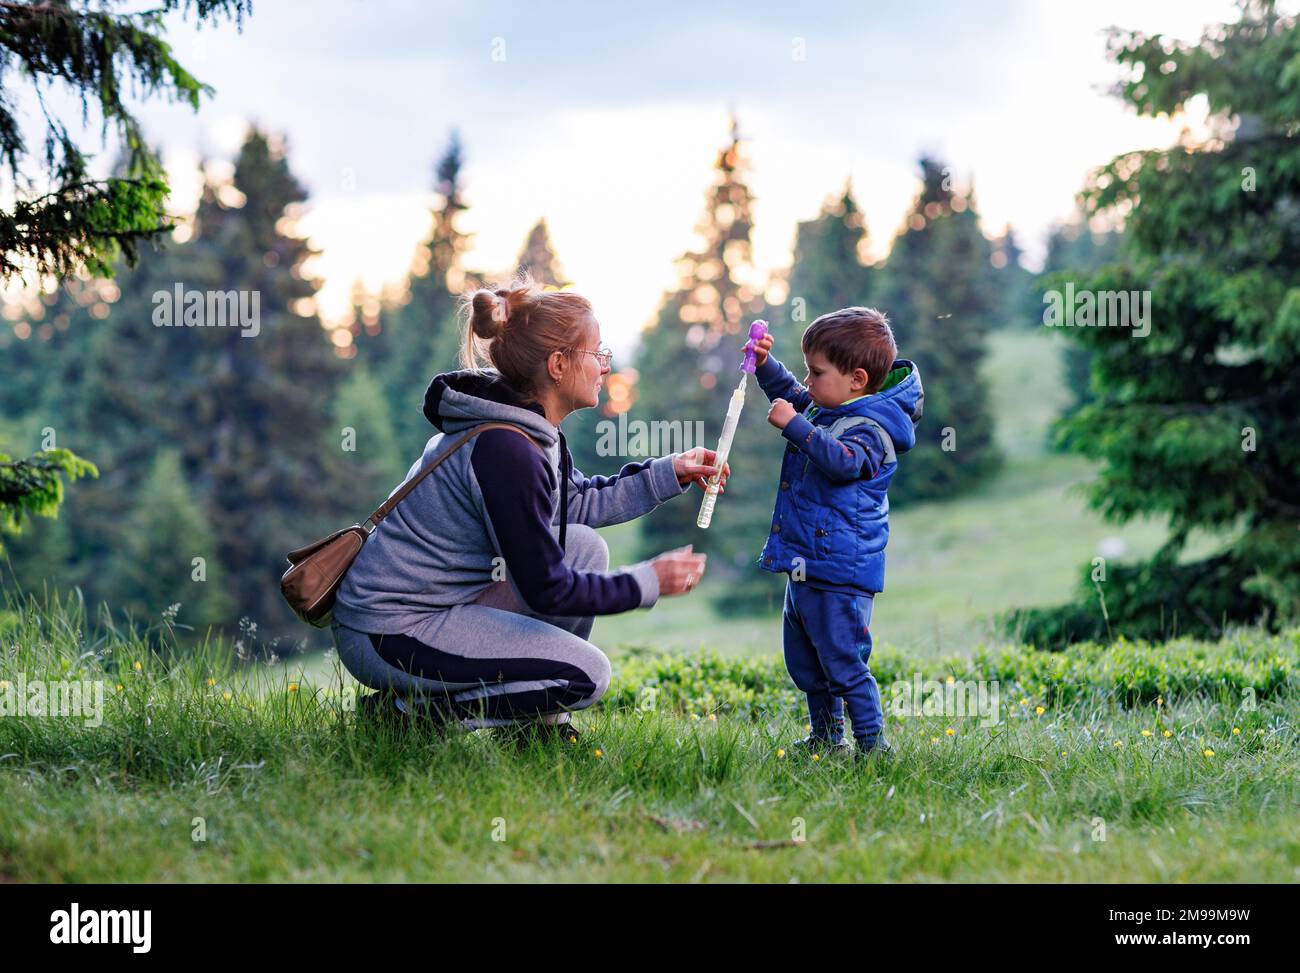 A happy smiling caring mother in a warm gray sports suit plays with her little cheerful son in a cute blue suit on a green lawn and teaches him to blo Stock Photo